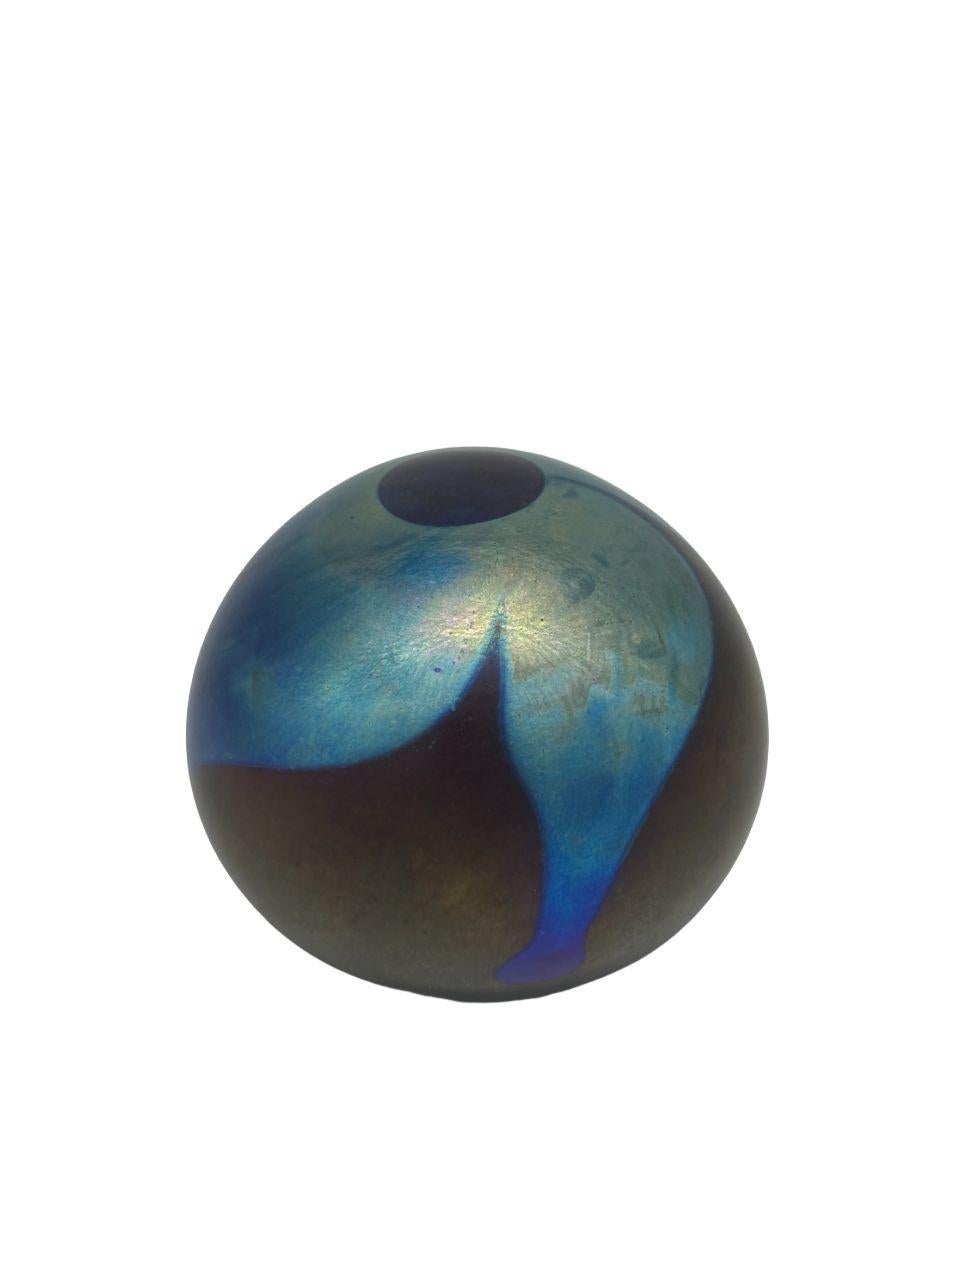 This exceptional 1975 John Barber Studio Art Glass Swirl Paperweight Weight stands out as a rare find with its distinctive blue chrome hues. The piece is not only signed by the renowned artist John Barber but also showcases a captivating swirl